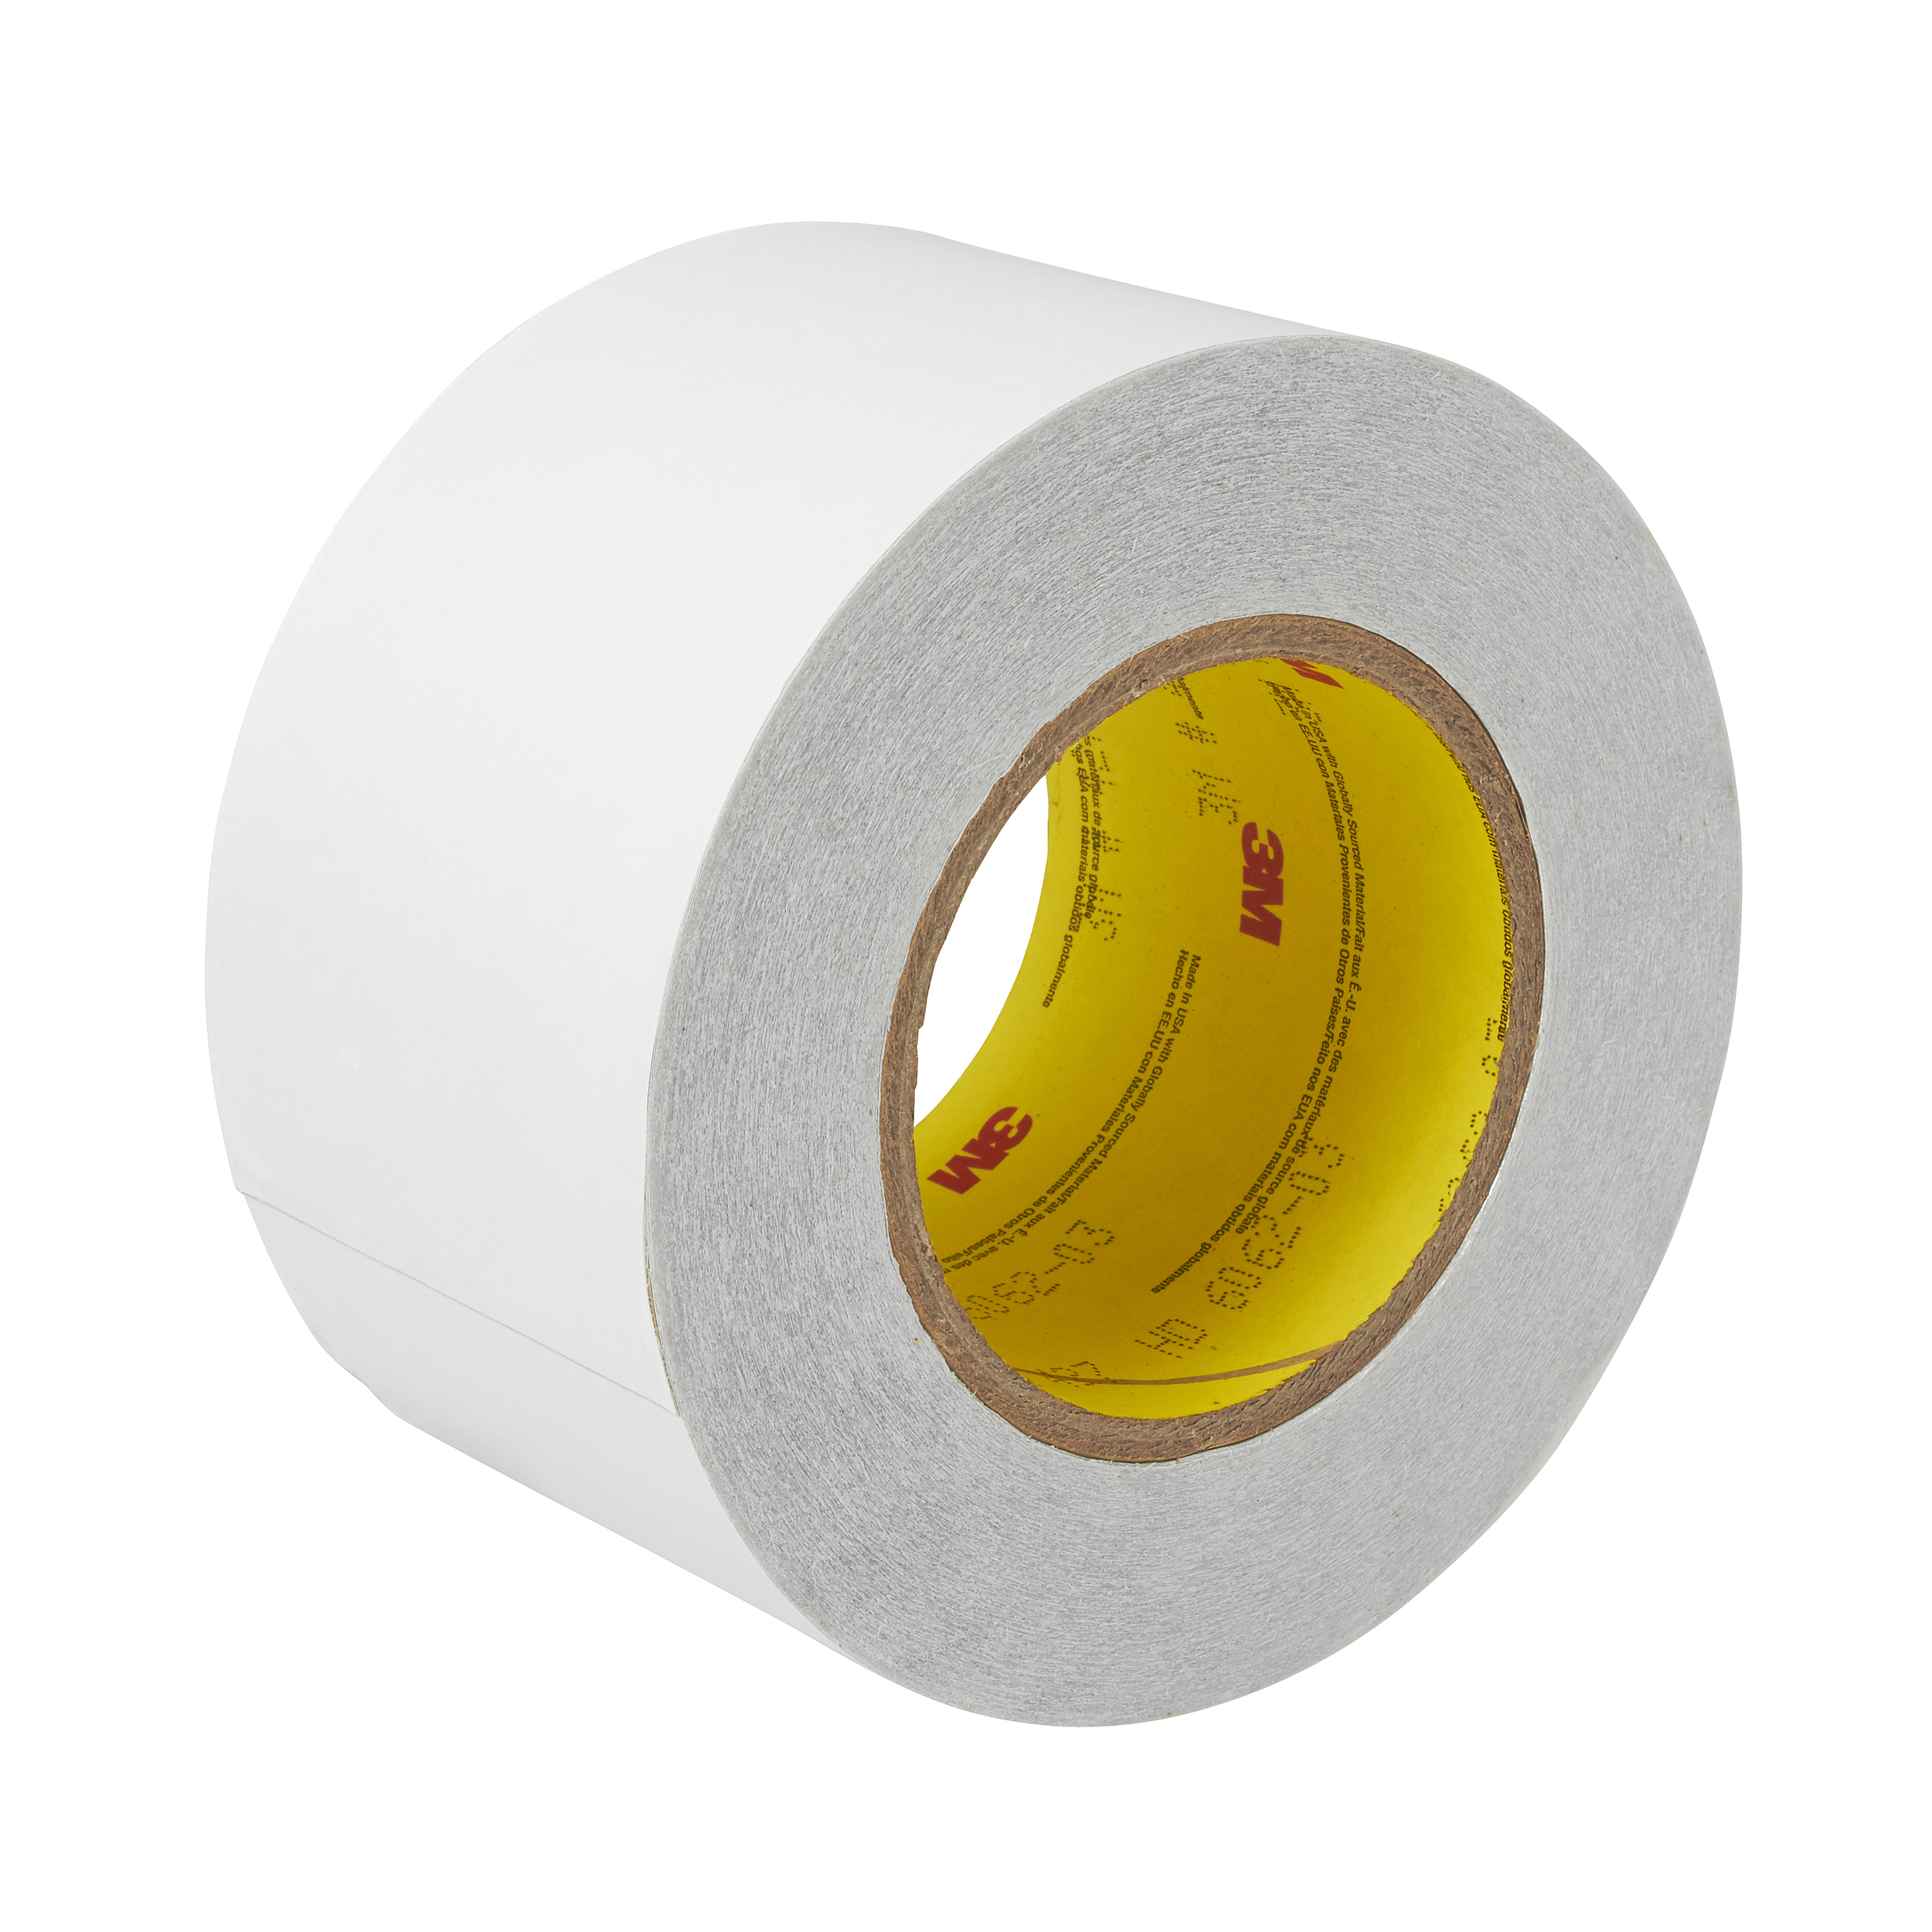 SILVER FOIL ALUMINIUM INSULATION REINFORCED TAPE 72 MM W 50M LONG.FREE SHIPPING 